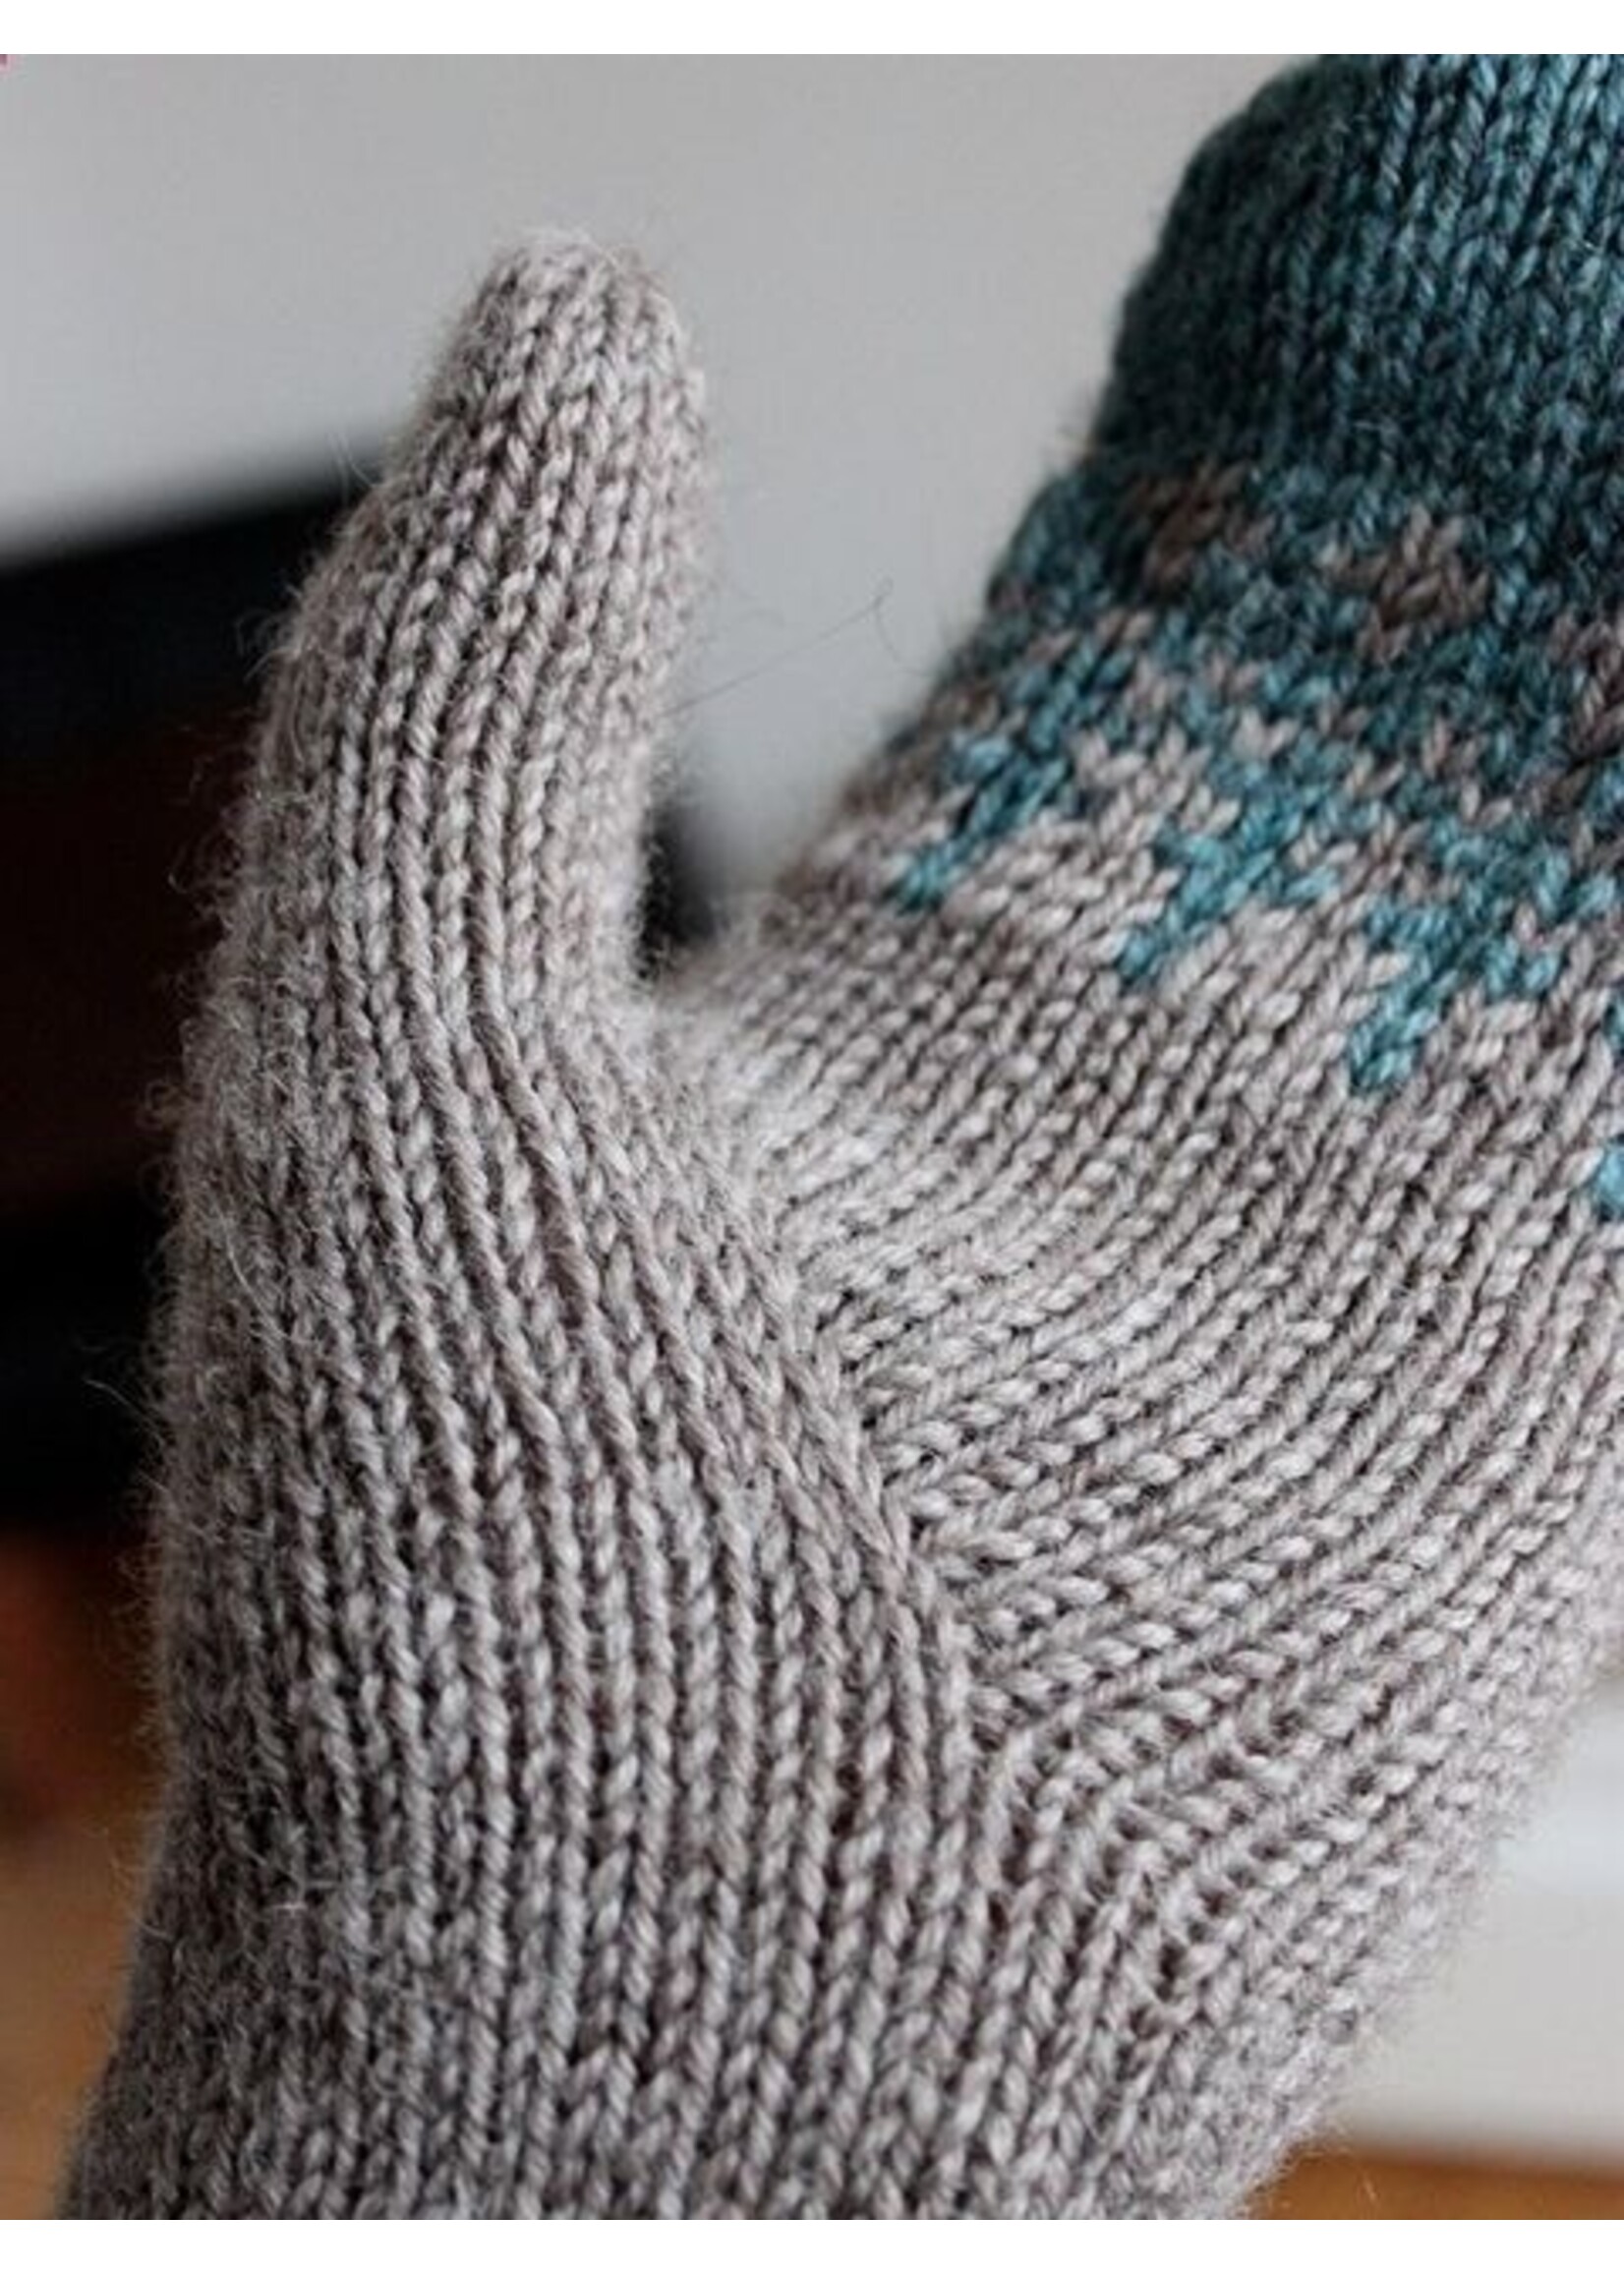 Rounded Gusset Mitten Class Feb 17th  1:00 - 3:00